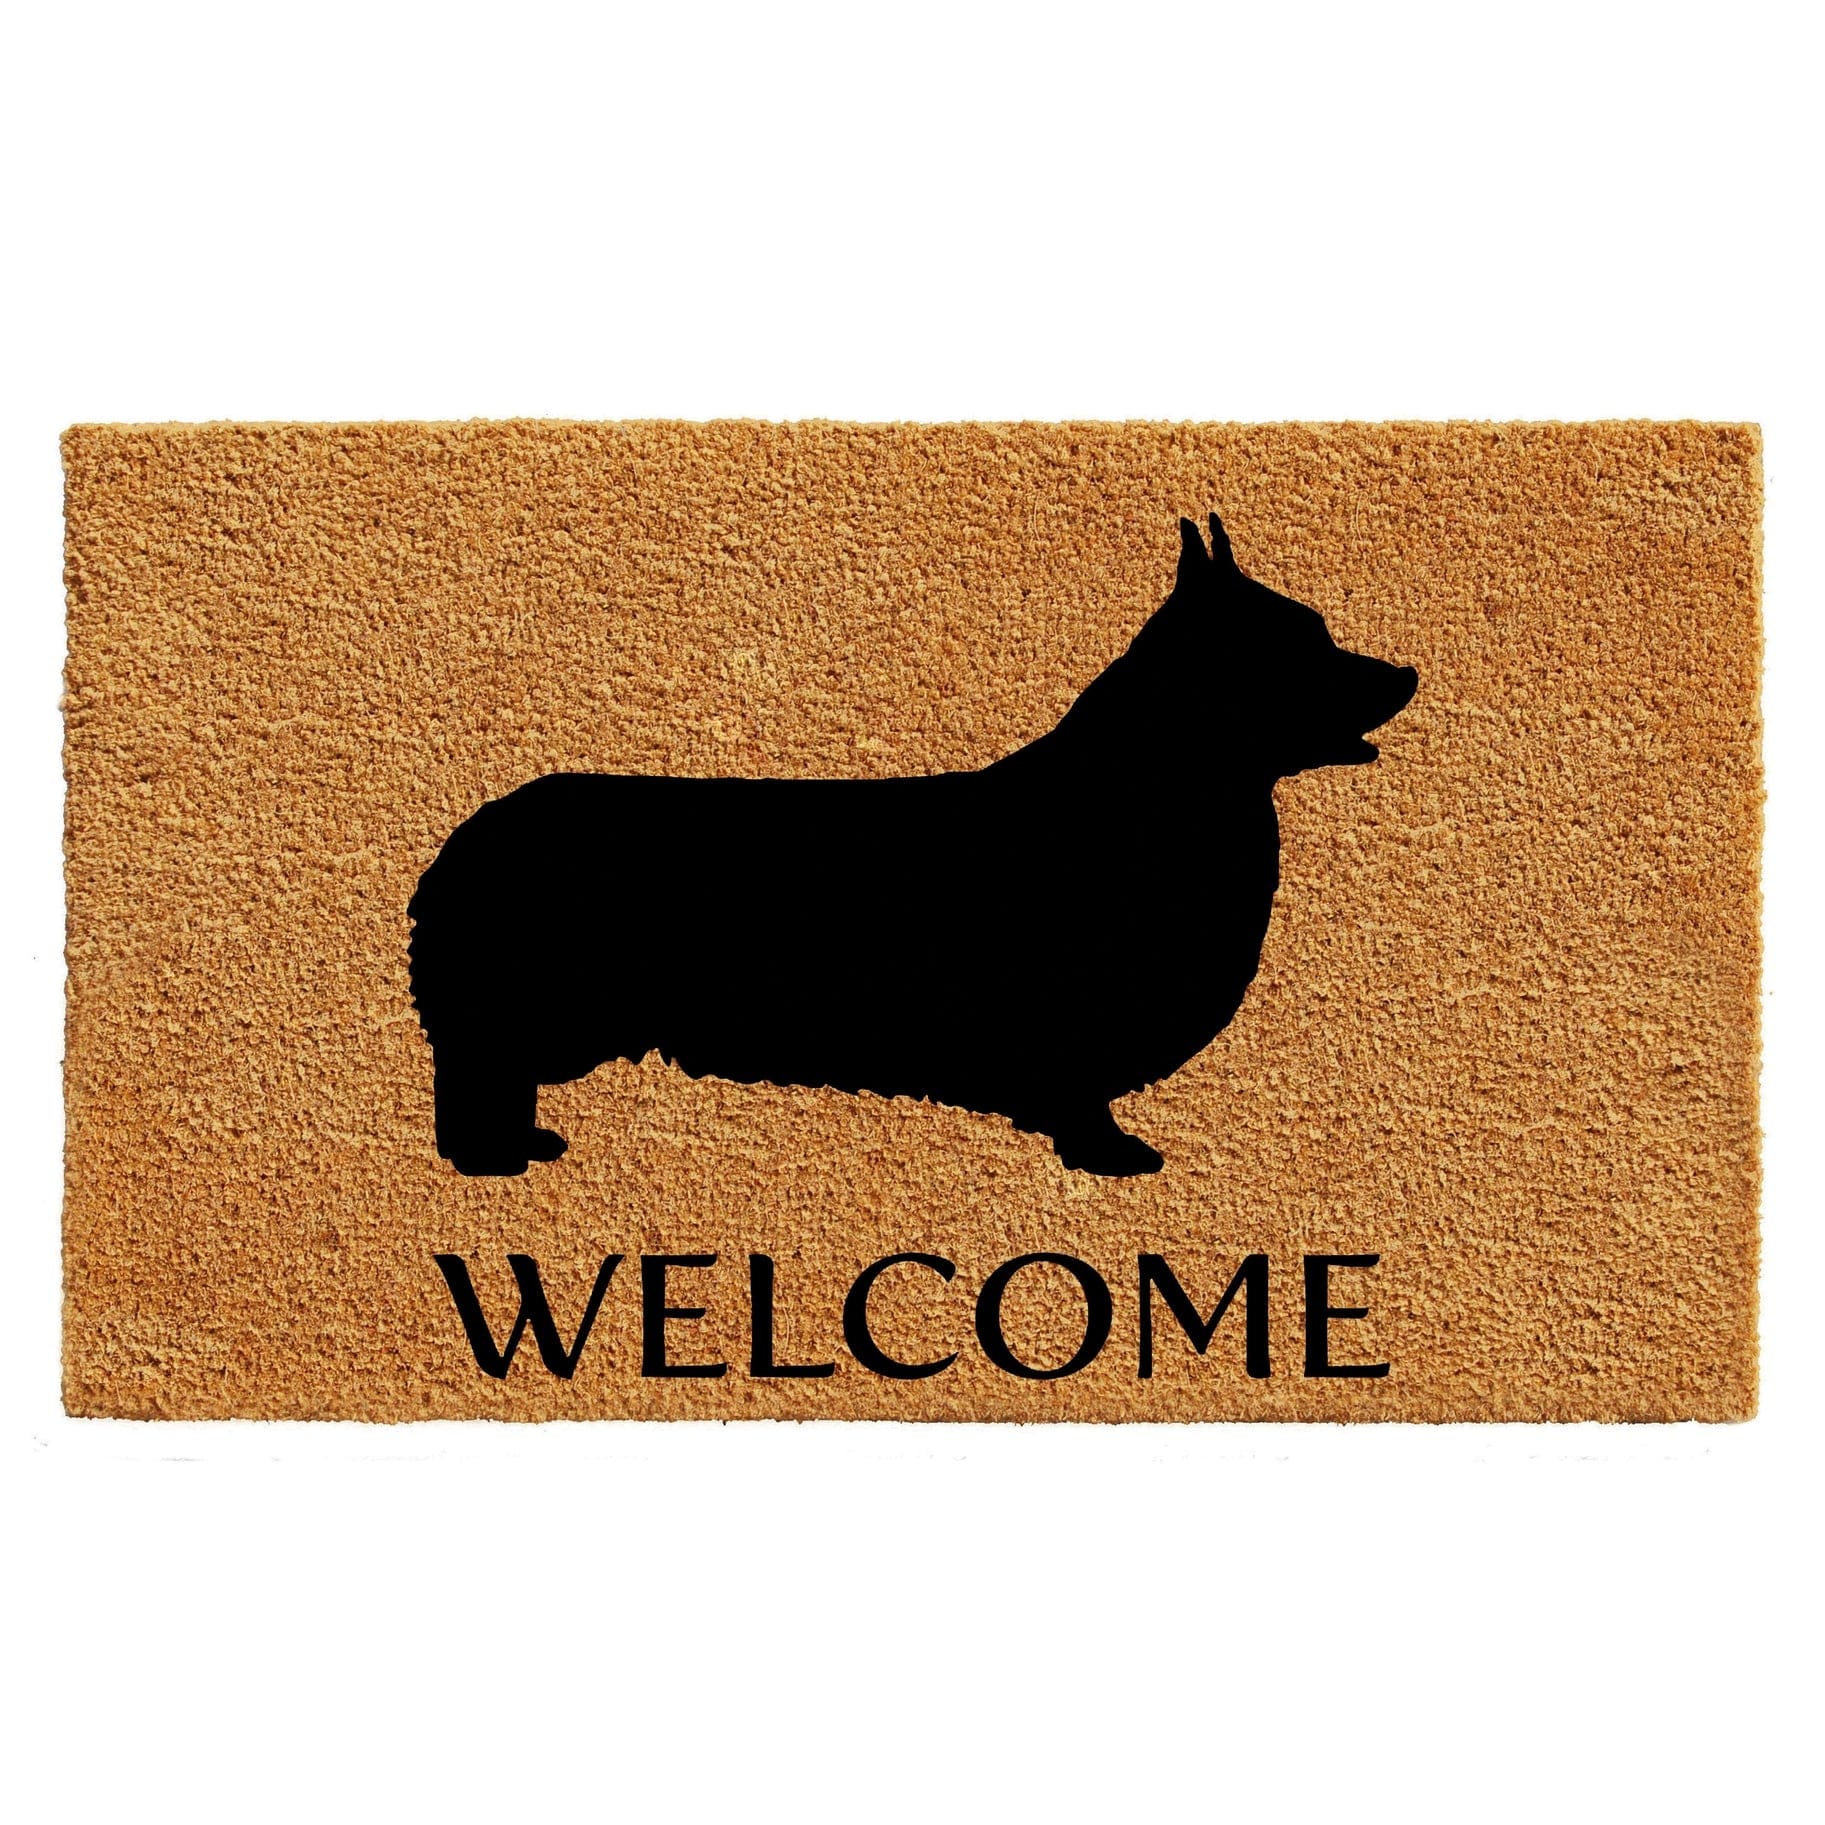 Pembroke Welsh Corgi Coir Welcome Mat Made in the USA - The Pink Pigs, A Compassionate Boutique